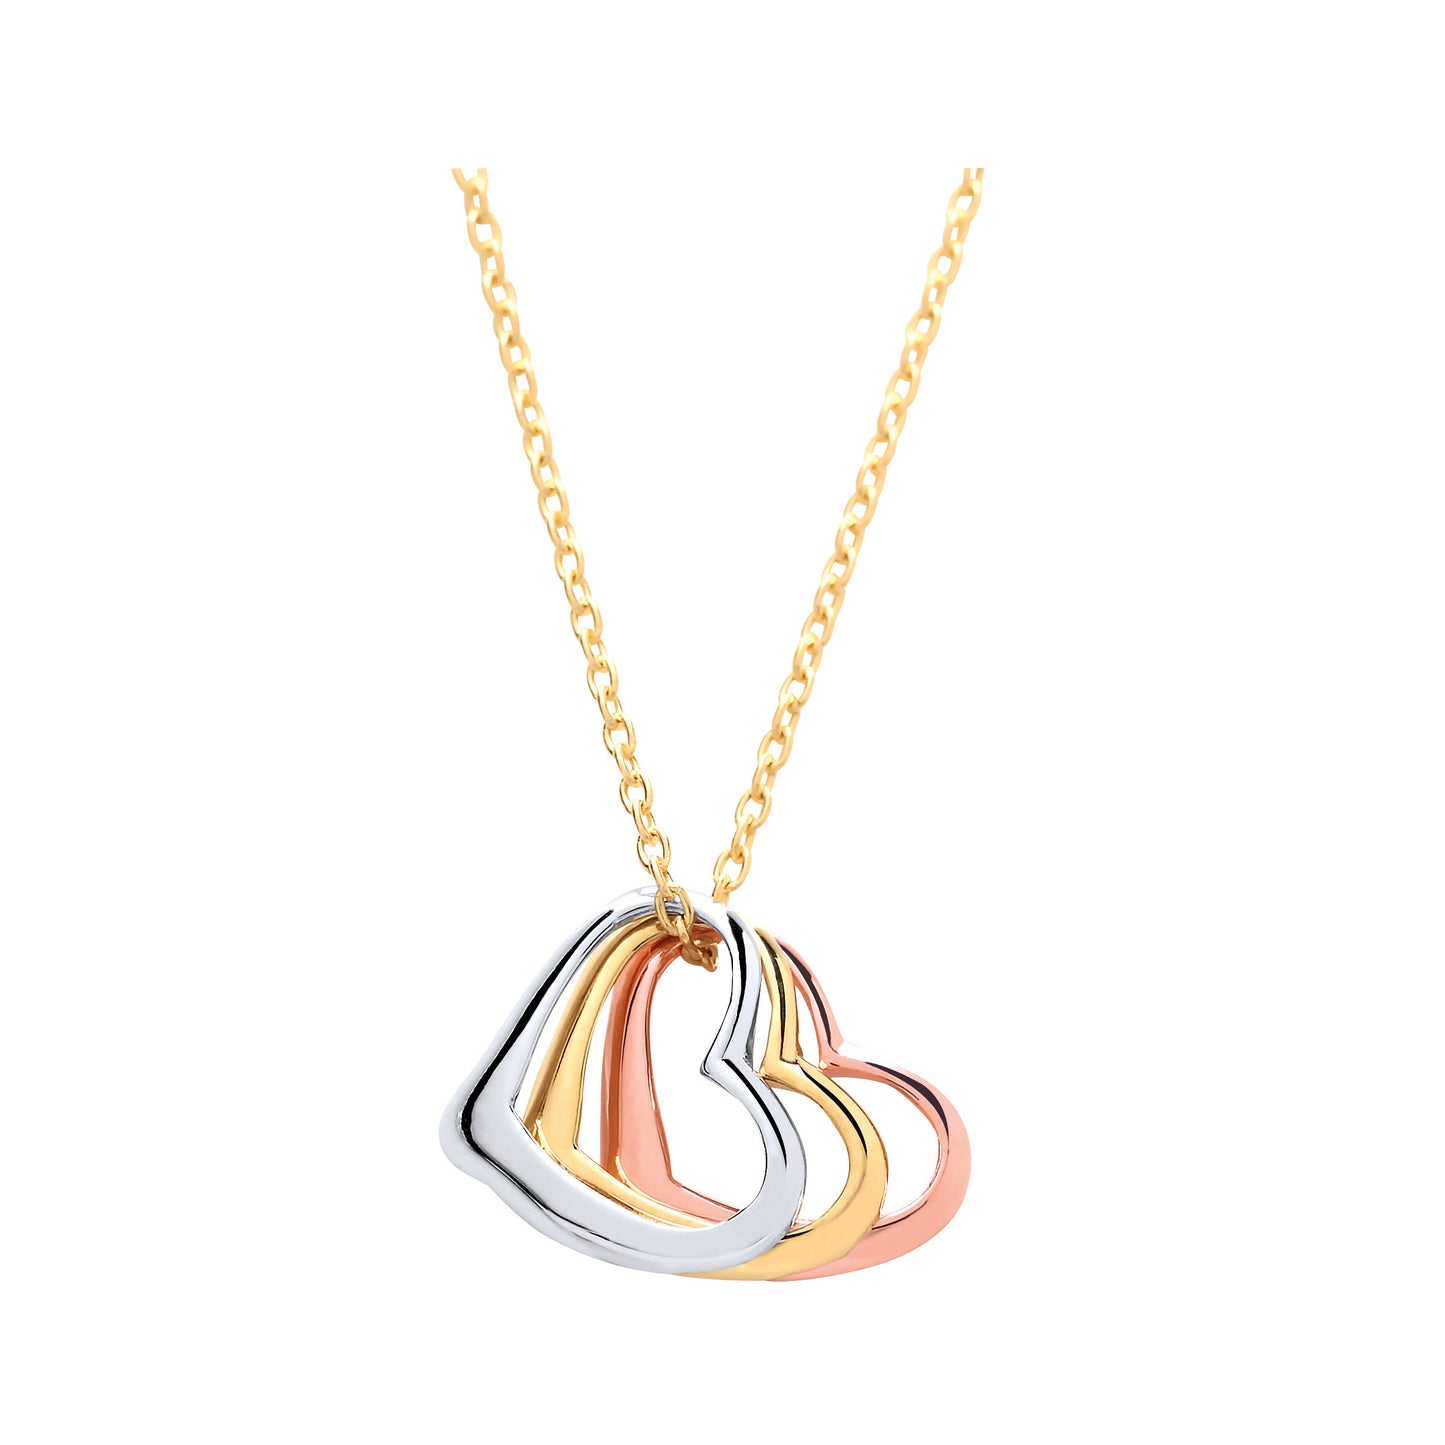 Multiple Colour 3 Hearts White Yellow Rose 9ct Gold Necklace Gift For Her